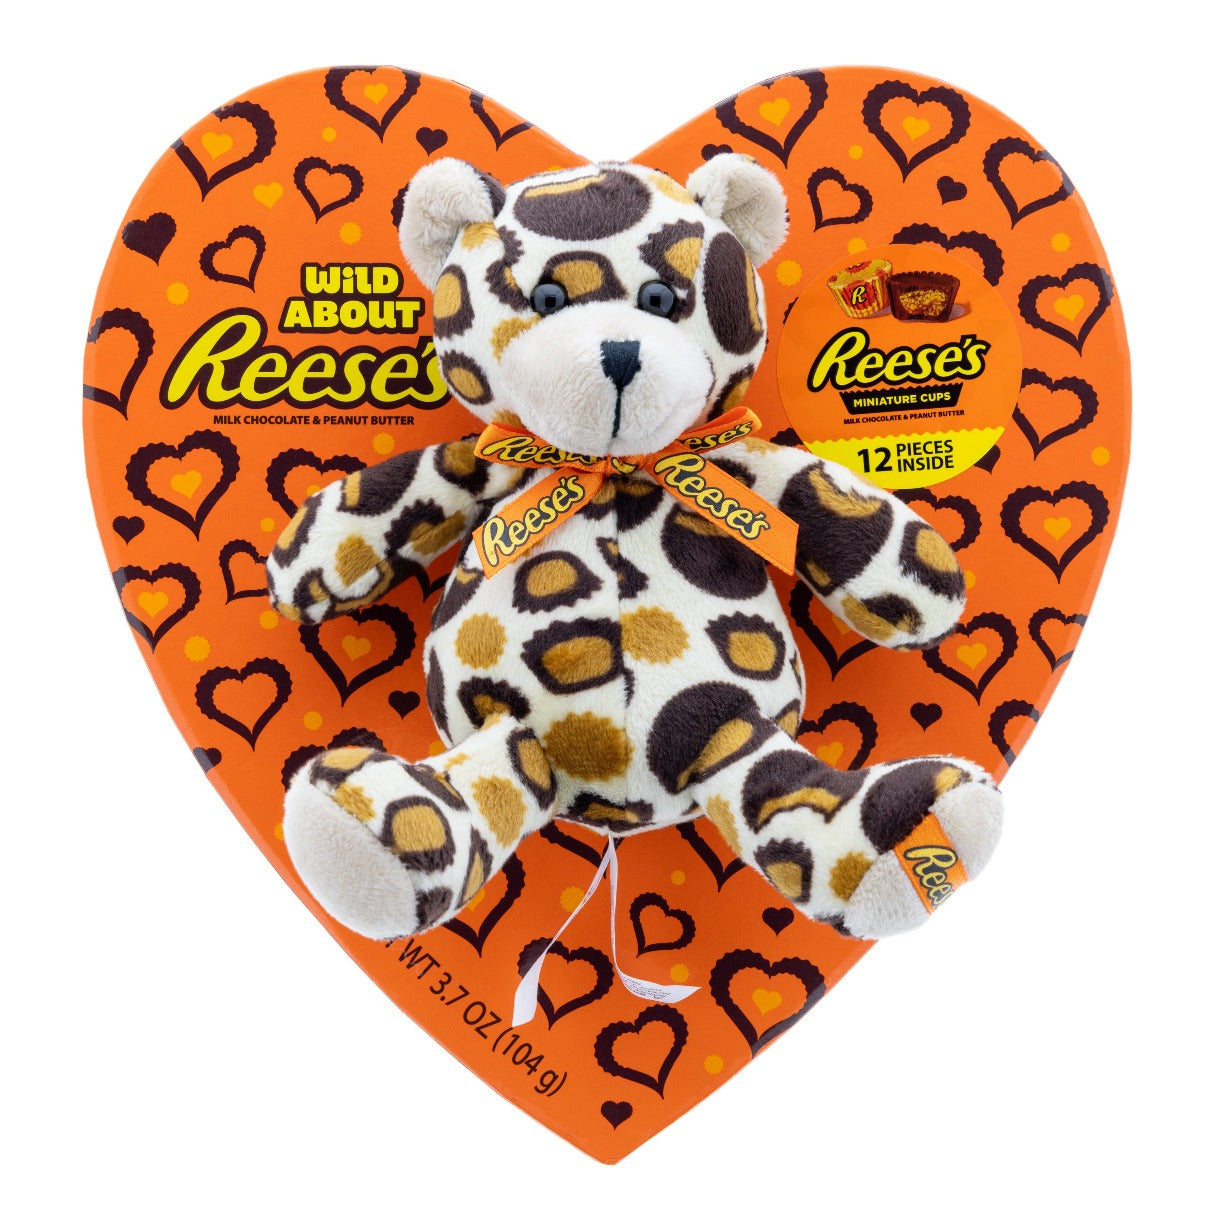 Valentine's Reese's Delight Heart Box with Plush & Peanut Butter Miniatures 3.1oz - 6ct